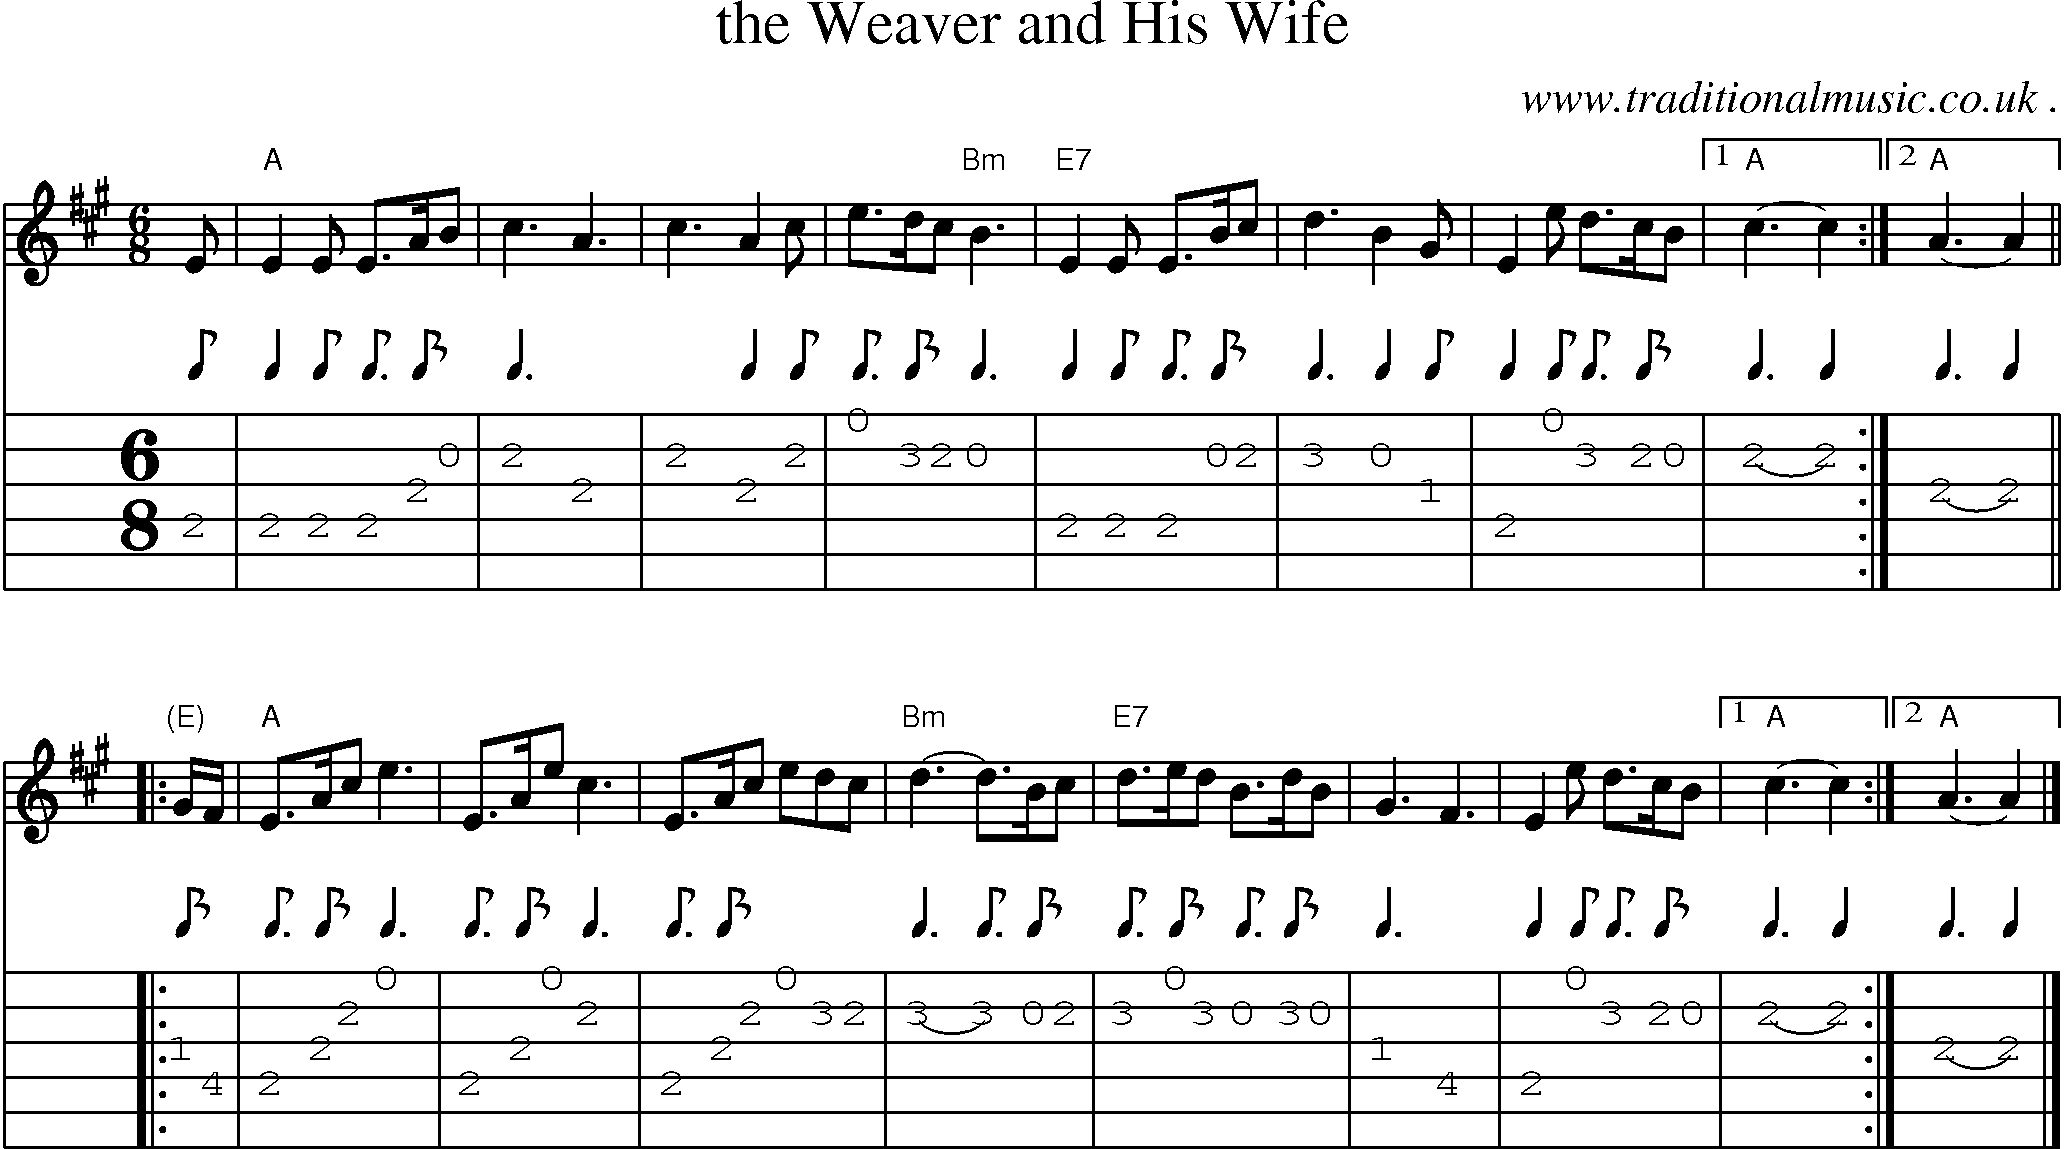 Sheet-music  score, Chords and Guitar Tabs for The Weaver And His Wife